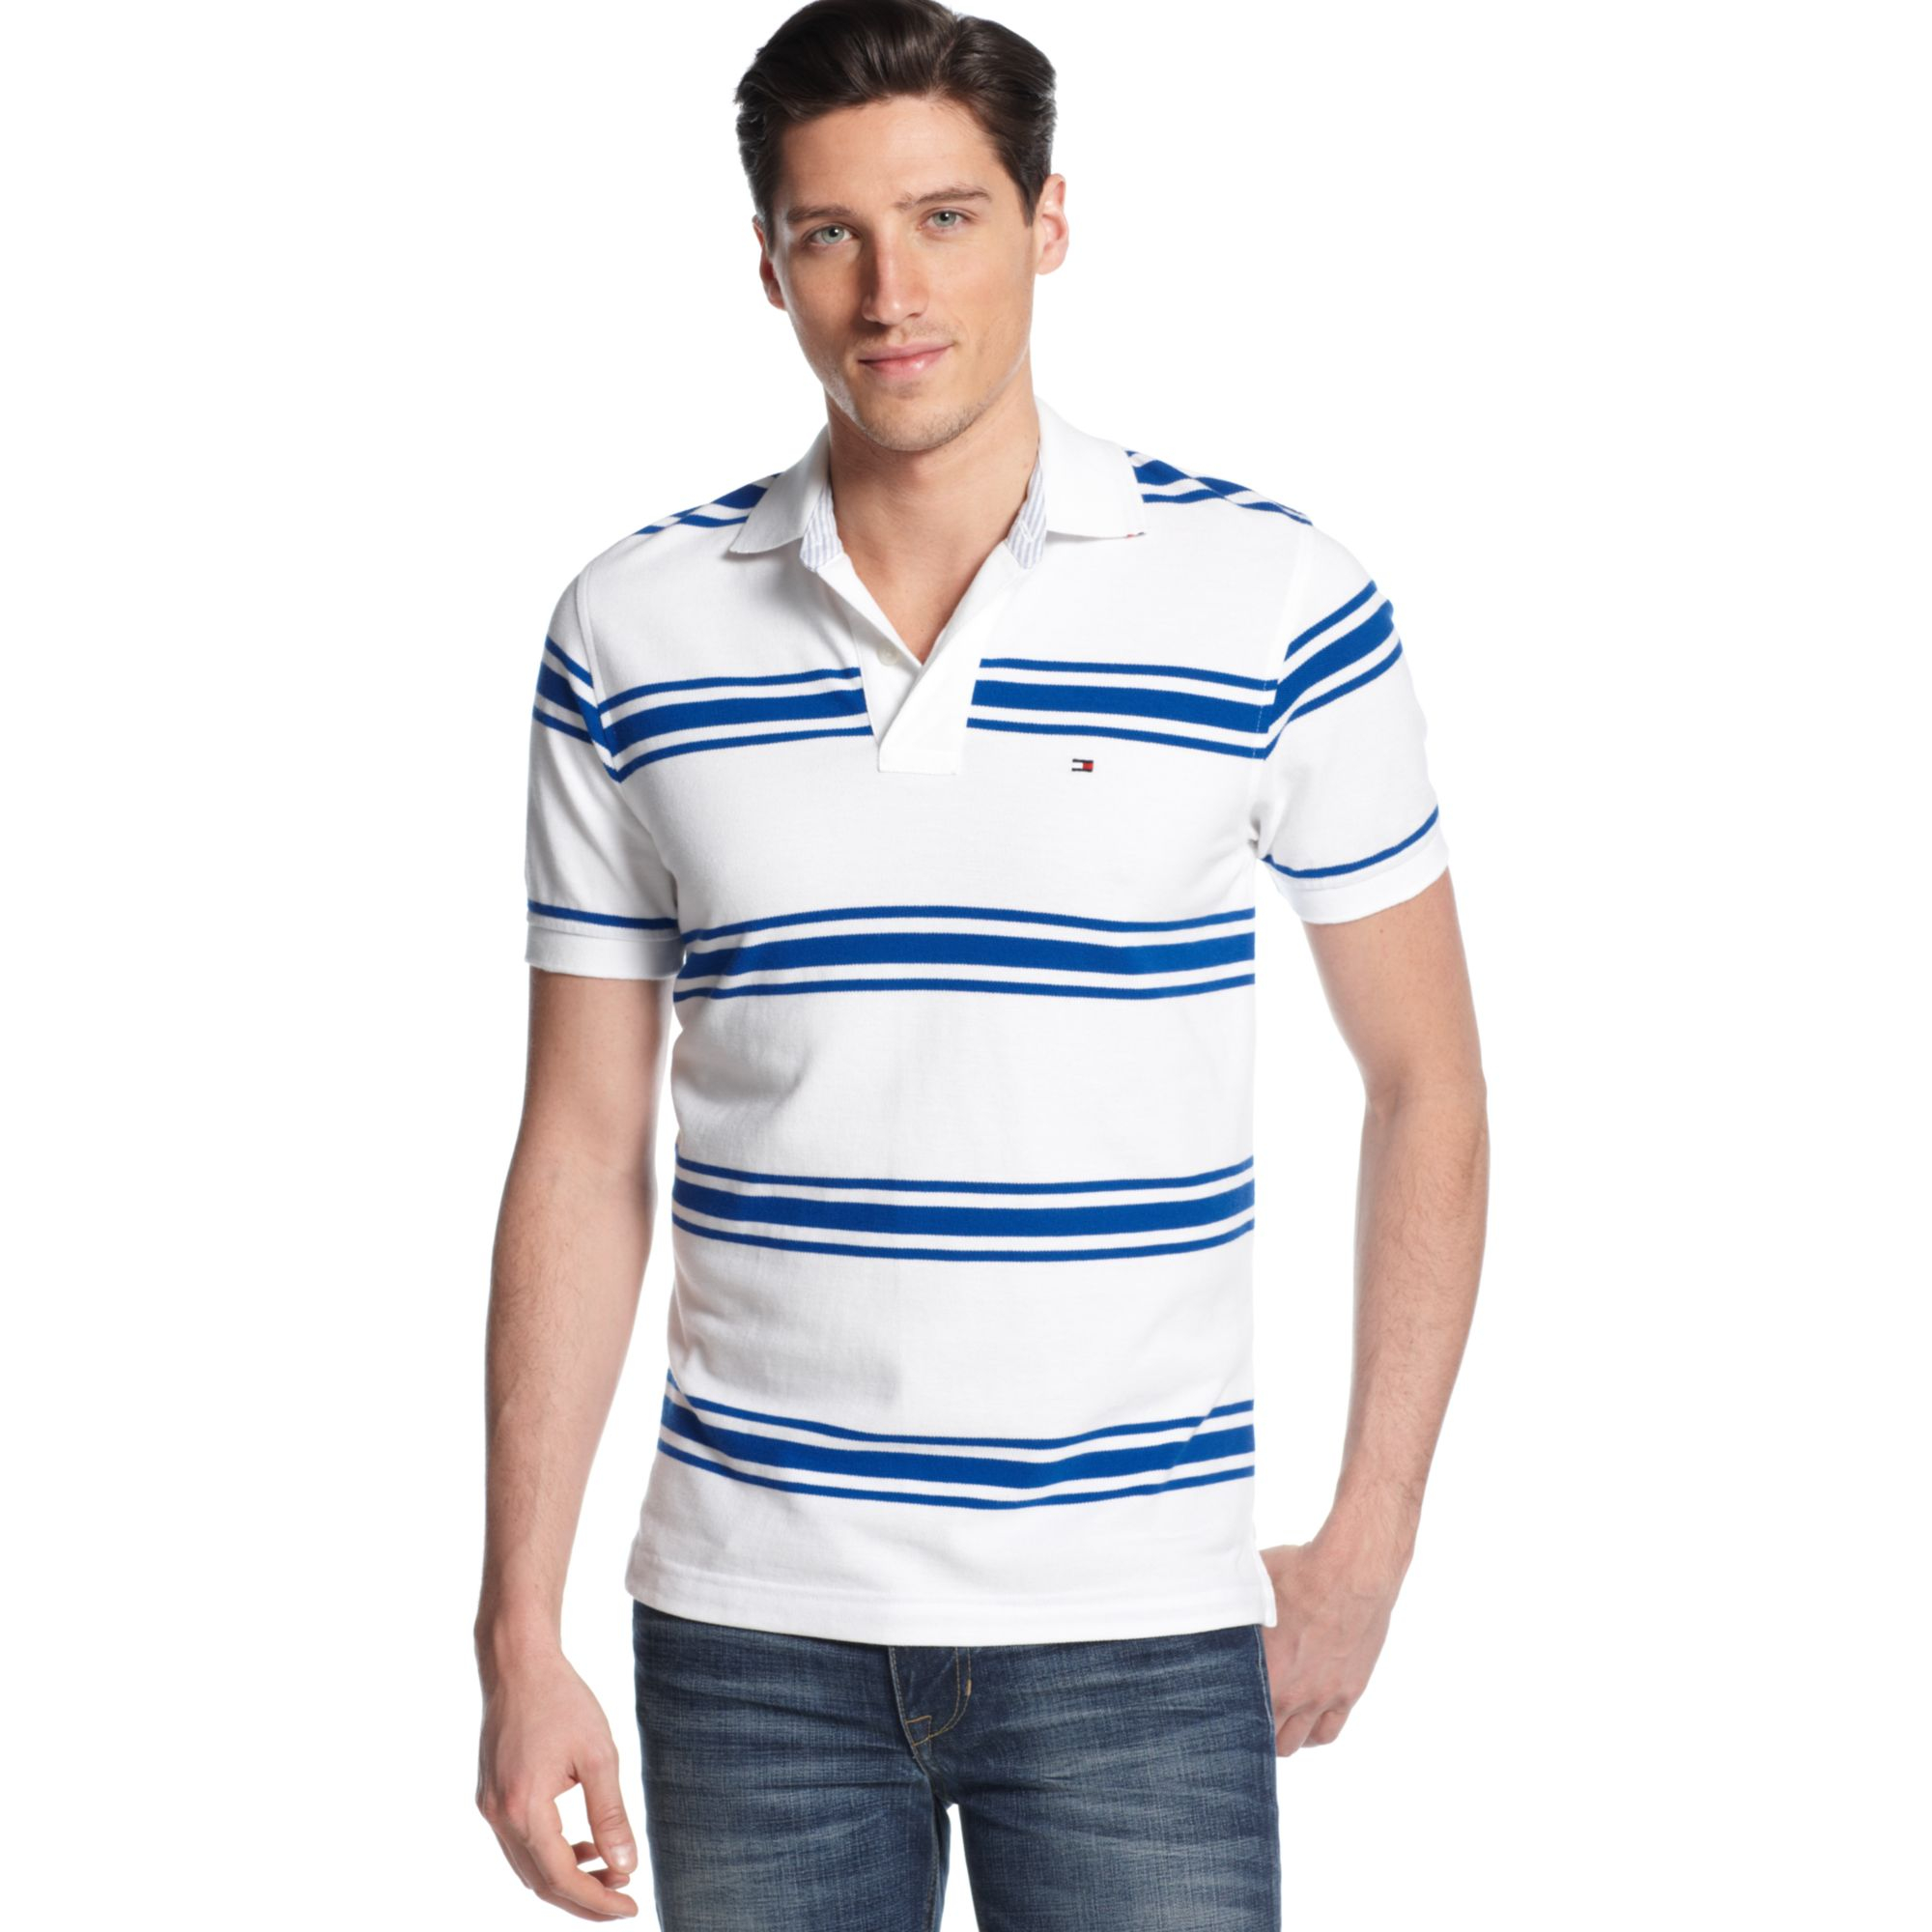 Tommy Hilfiger Crosby Striped Polo Shirt in Blue for Men - Lyst